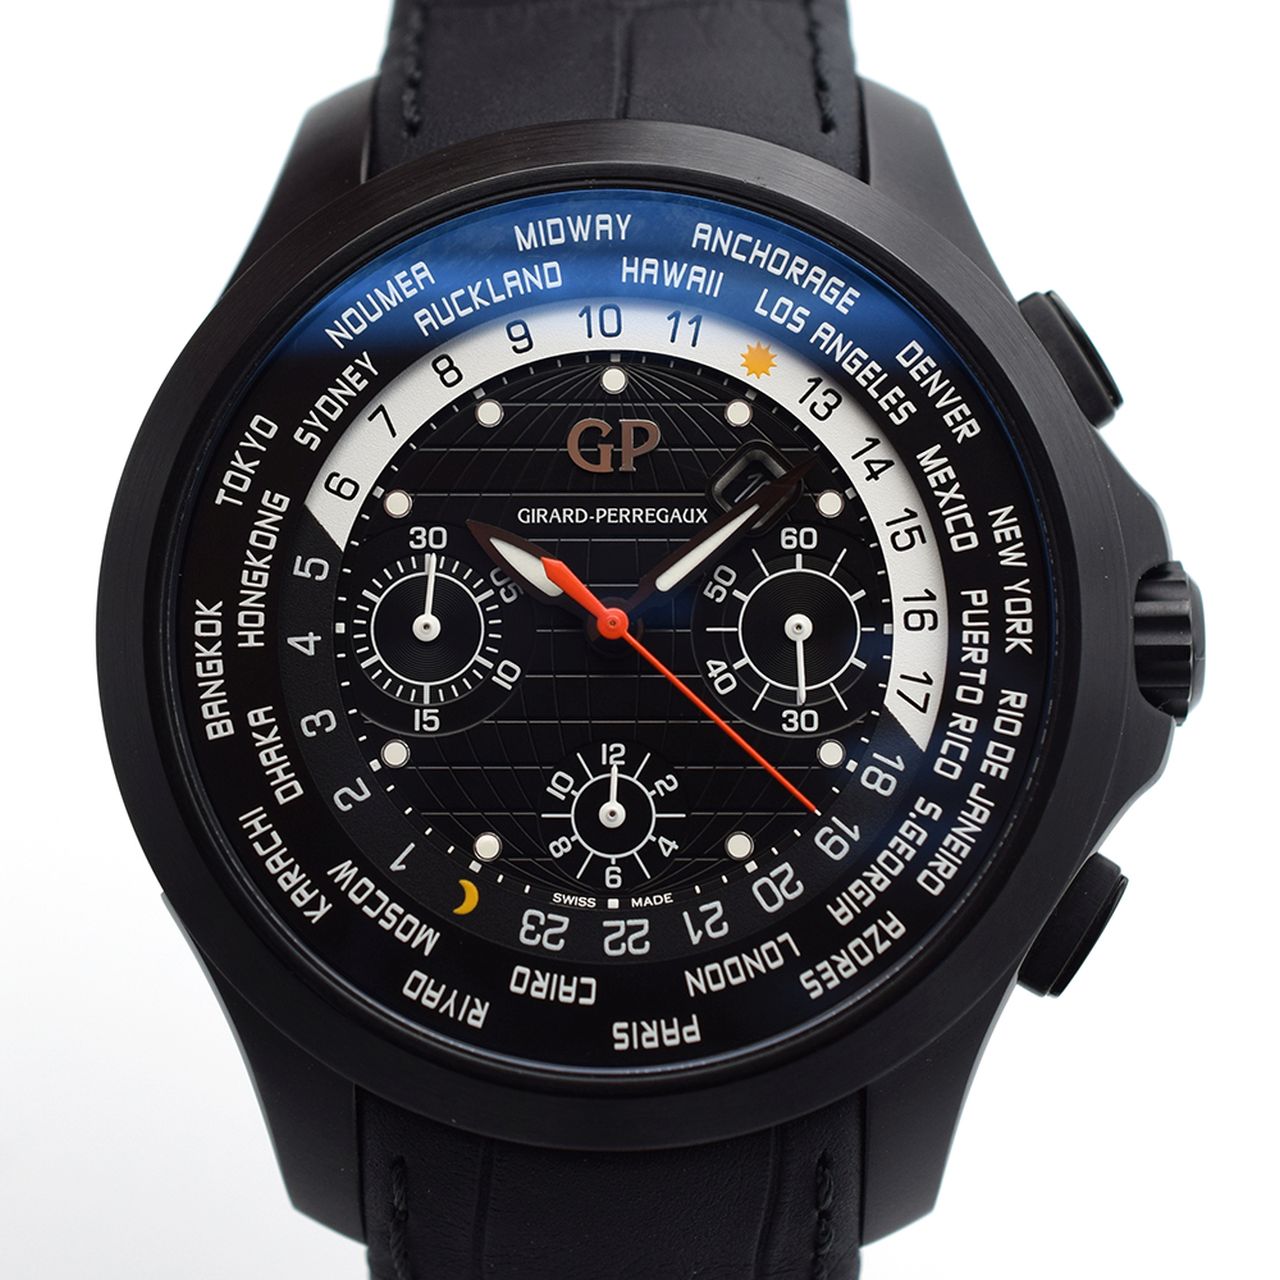 GENTLEMAN'S GIRARD PERREGAUX TRAVELLER WW.TC CHRONOGRAPH BLACK, NOVEMBER 2016 BOX AND PAPERS, 44MM - Image 6 of 11